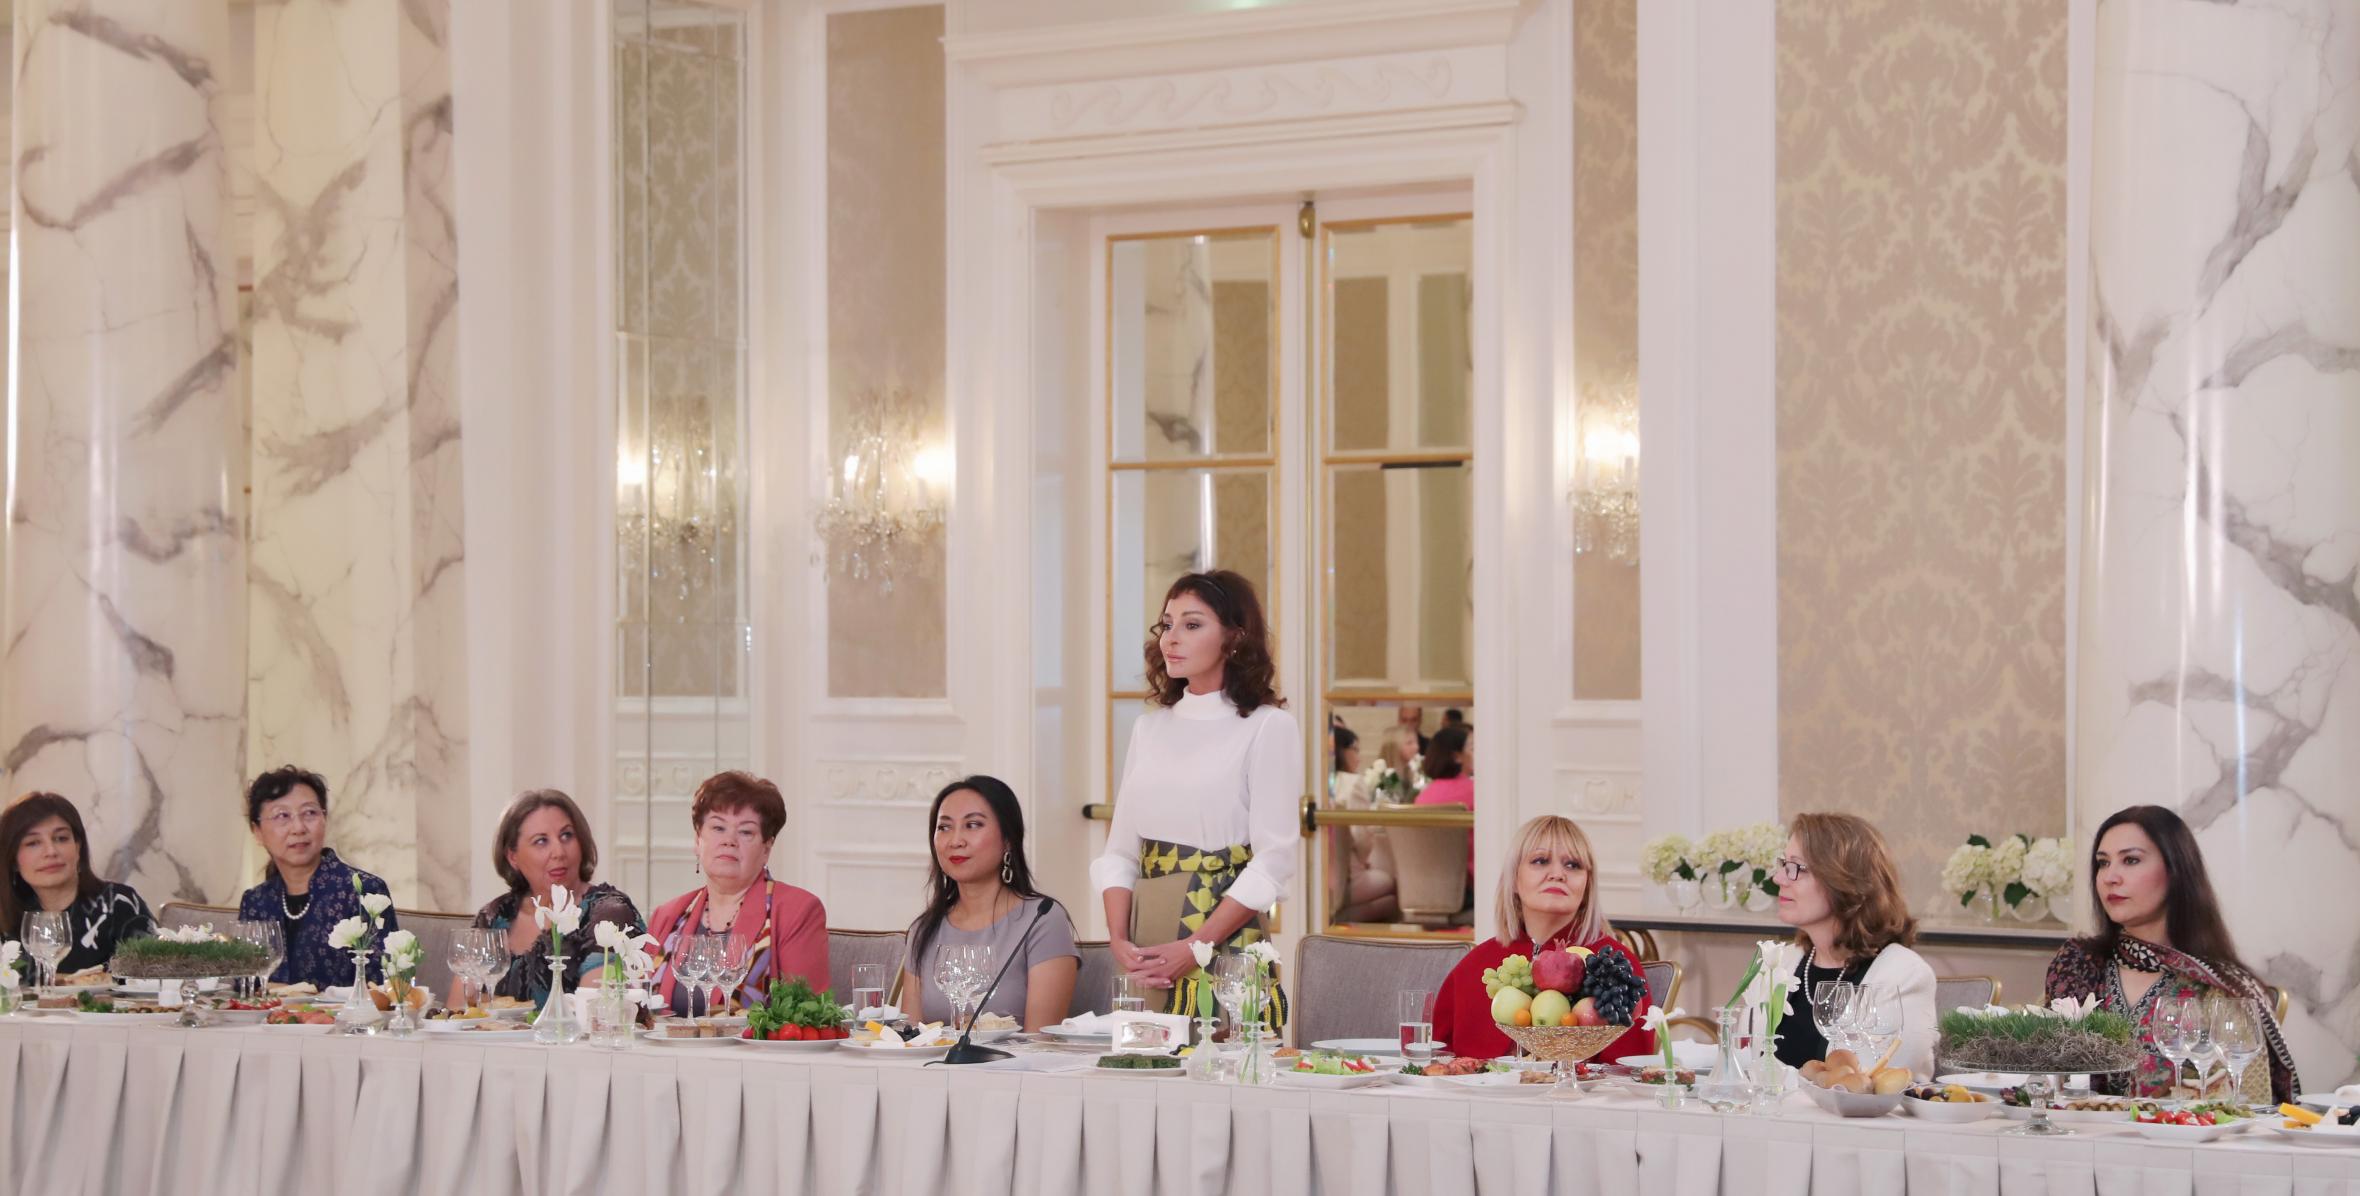 First Vice-President Mehriban Aliyeva met with spouses of heads of diplomatic missions